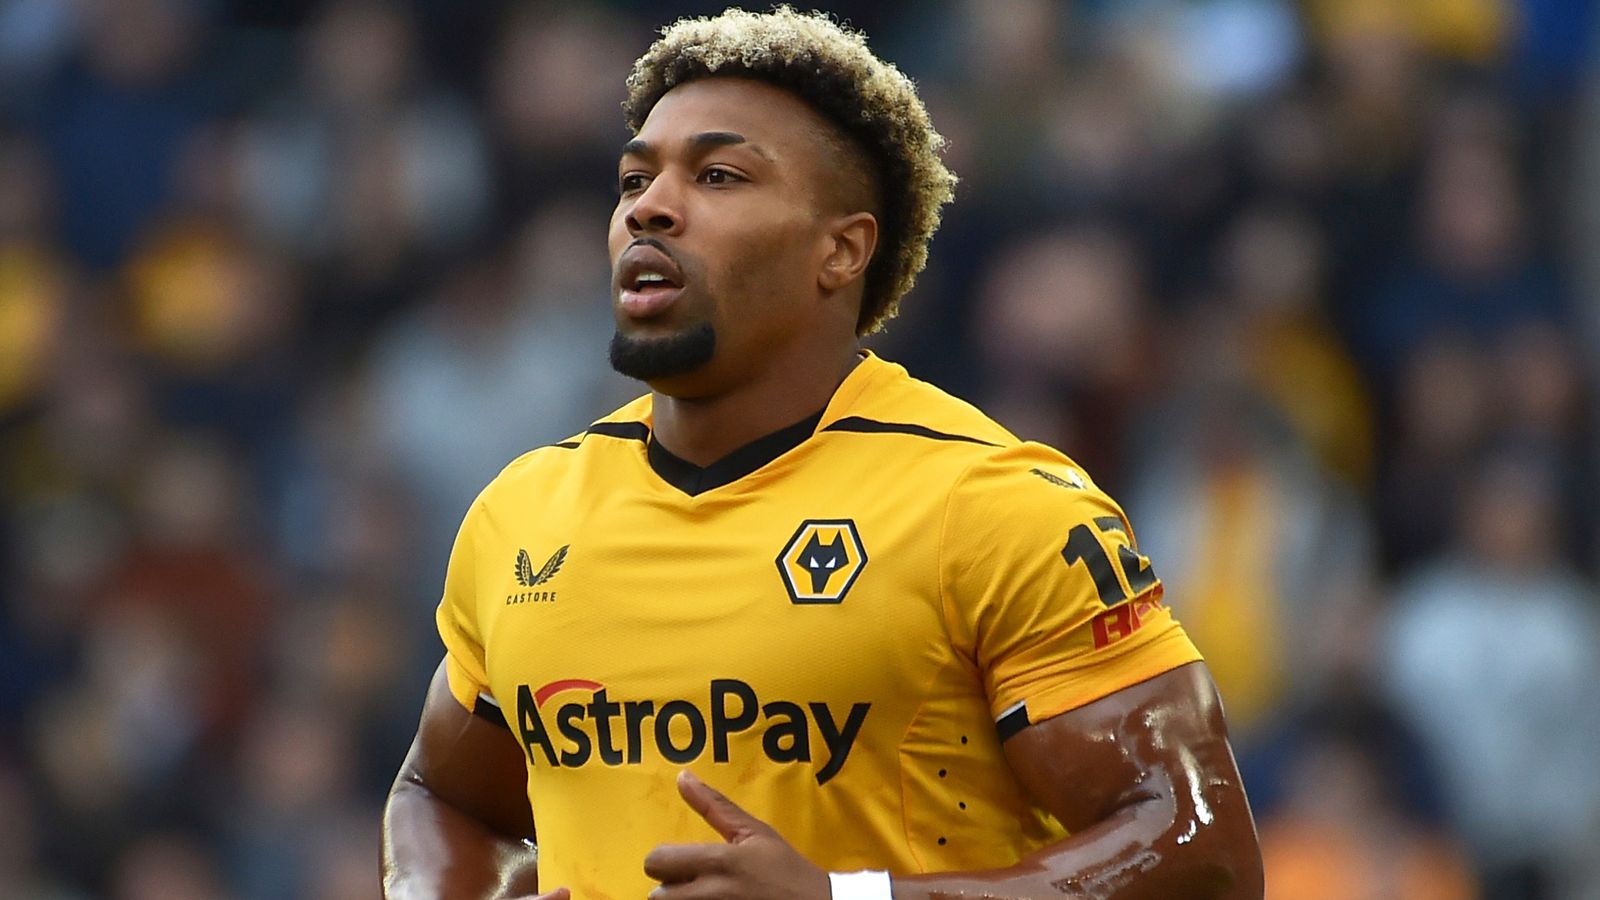 Adama Traore: Wolves contract running out but former Barca man welcomes pressure